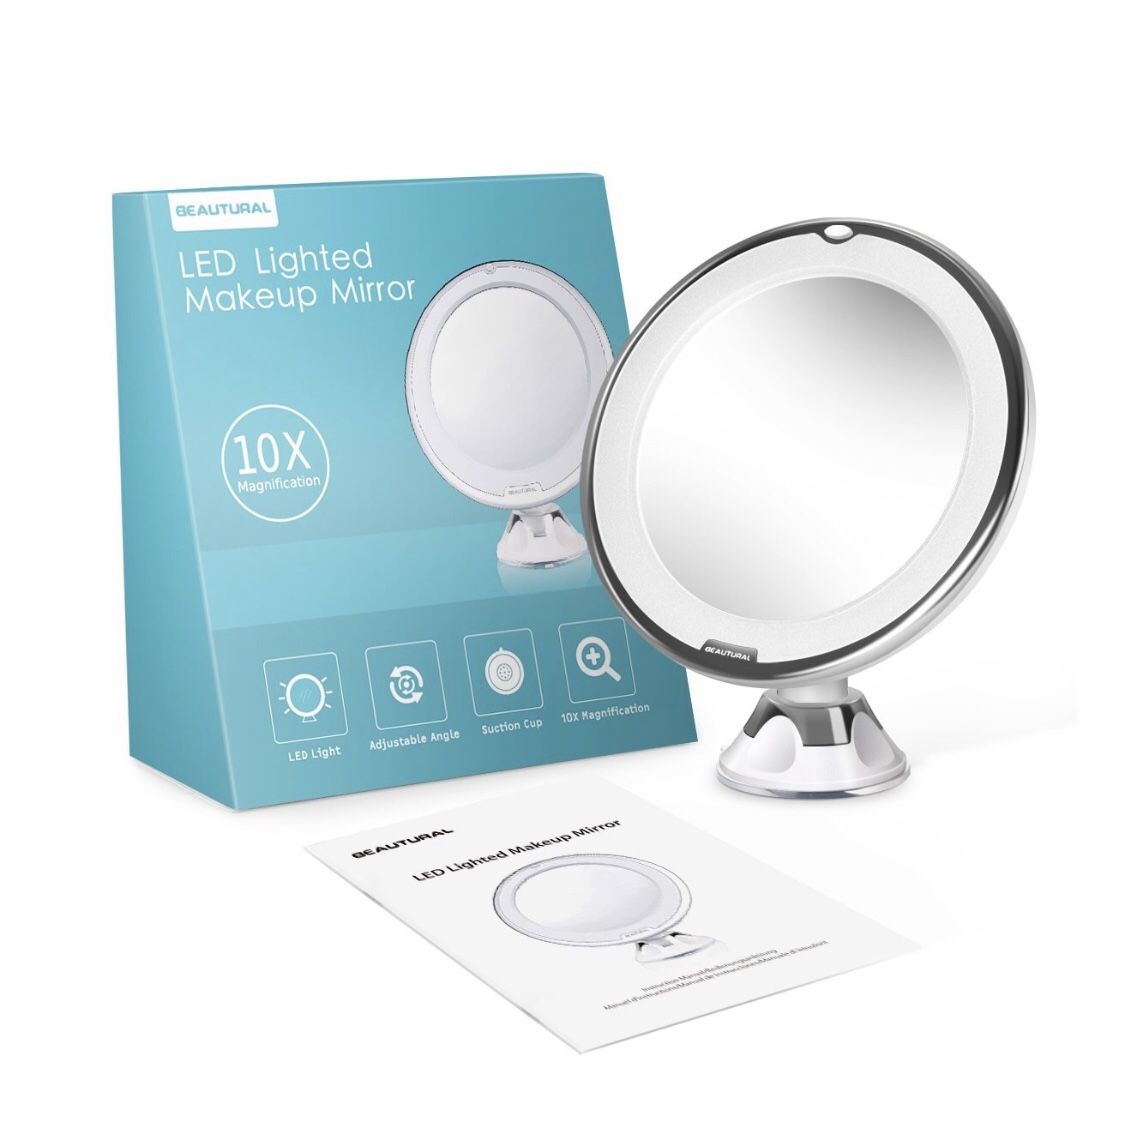 Brand-new!!! 10X Magnifying Makeup Vanity Mirror With Lights, LED Lighted Portable Hand Cosmetic Magnification Light up